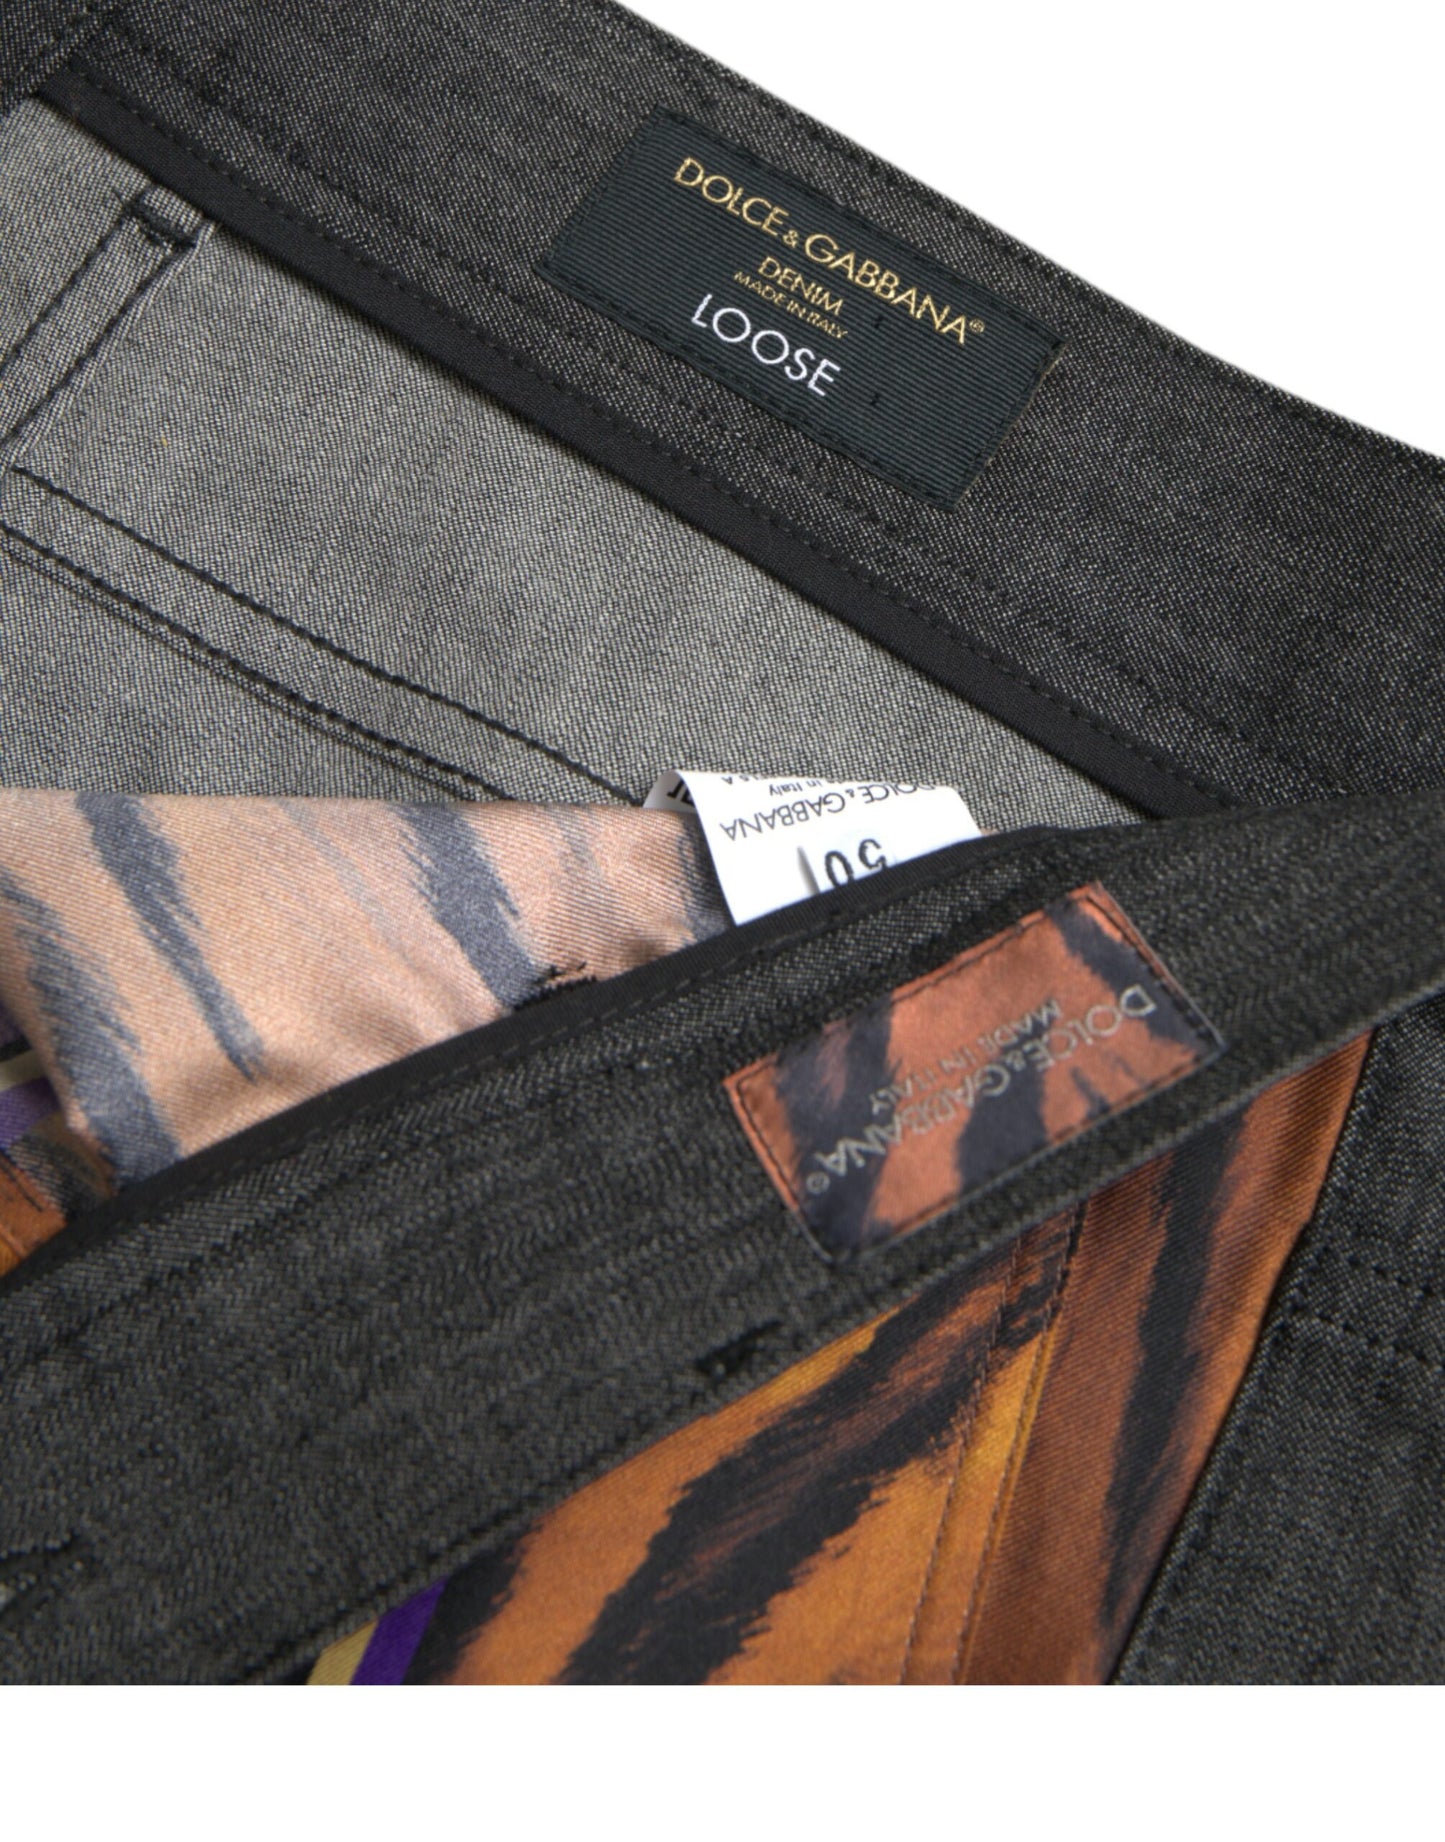 Dolce & Gabbana Multicolor Tiger Leopard Cotton Loose Tapered Pants